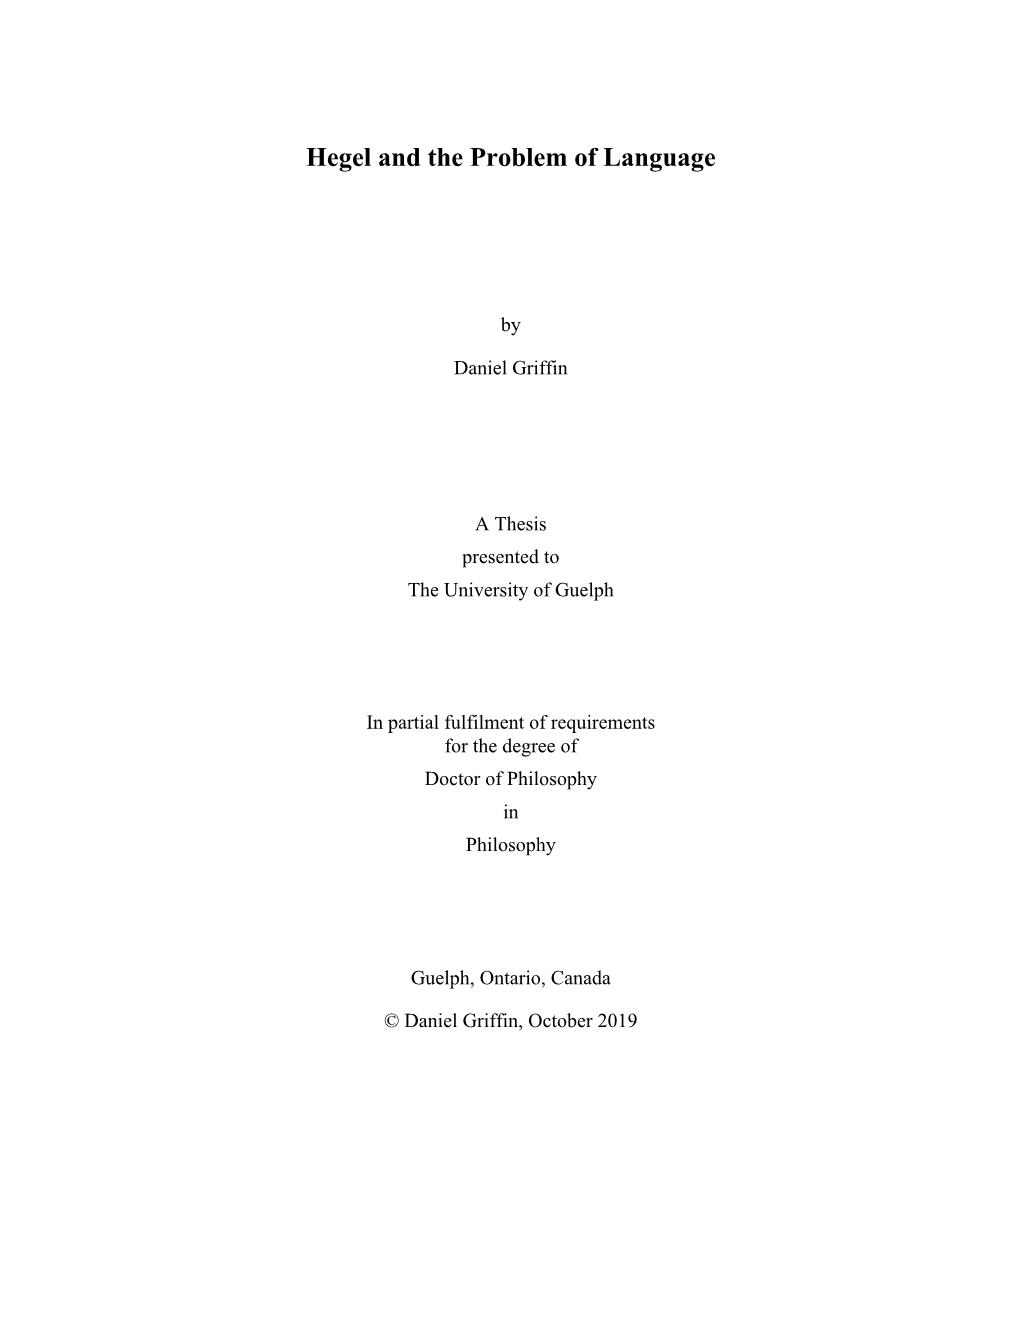 Hegel and the Problem of Language-ETD Monograph